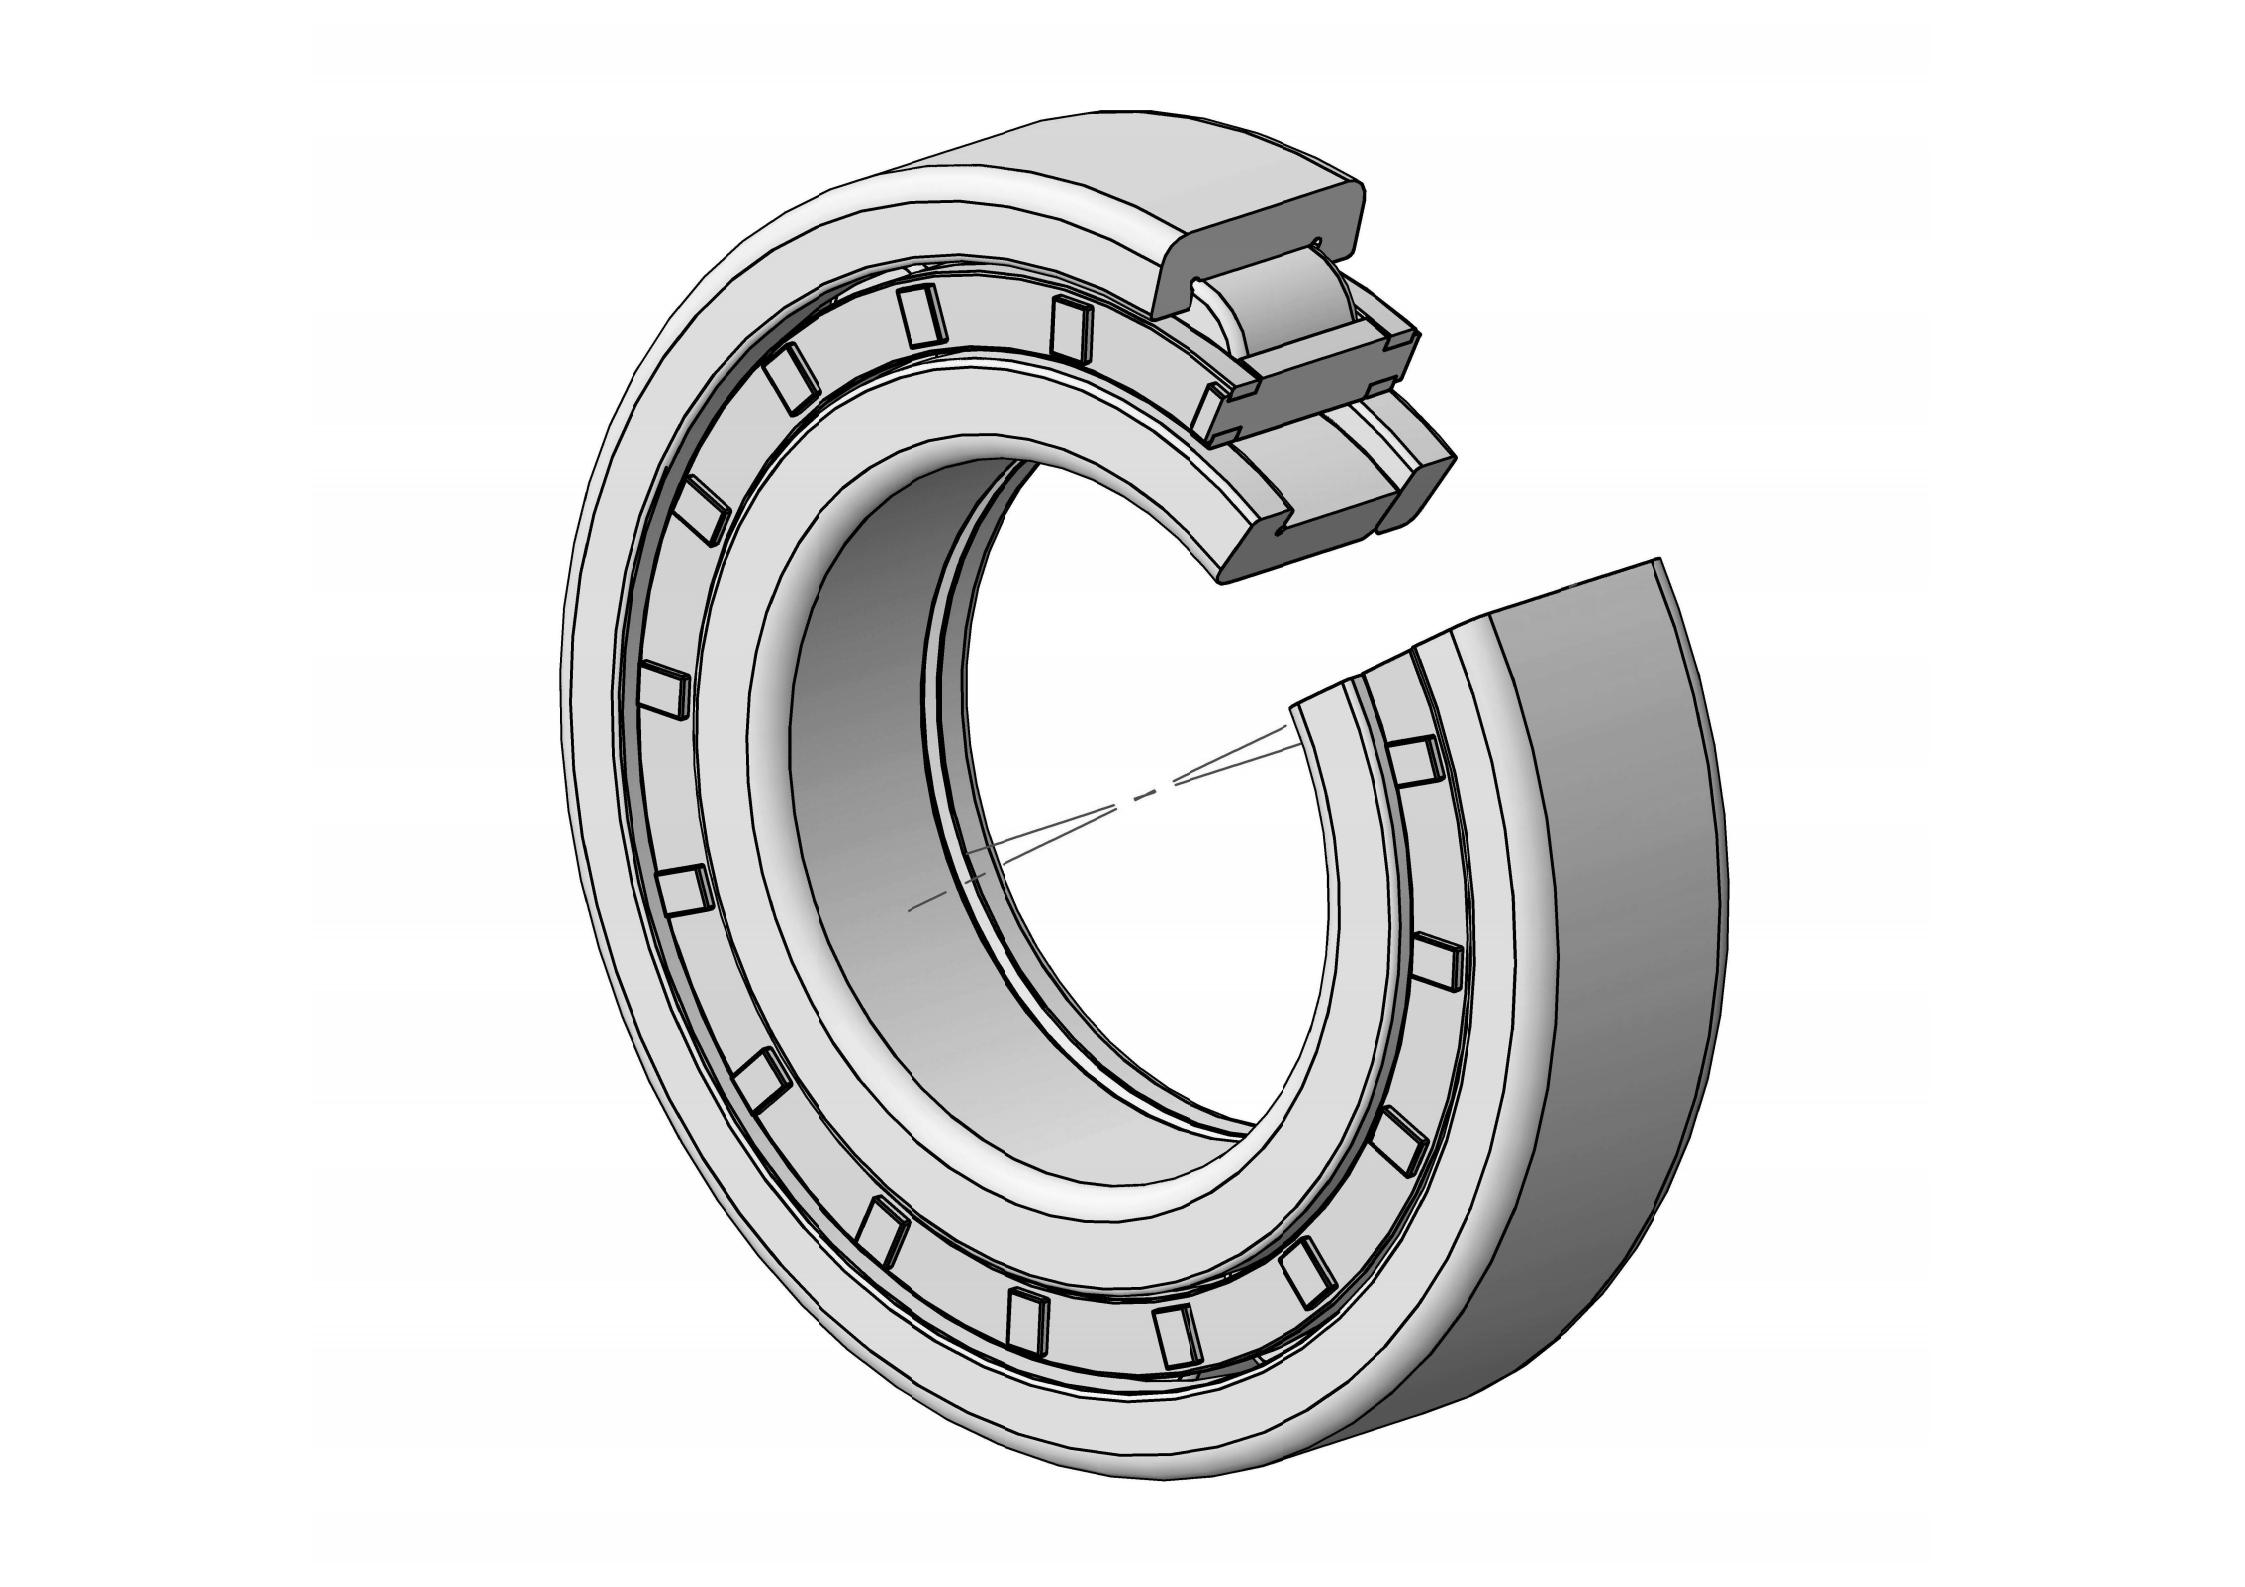 NUP306-E Single Row Cylindrical roller bearing 